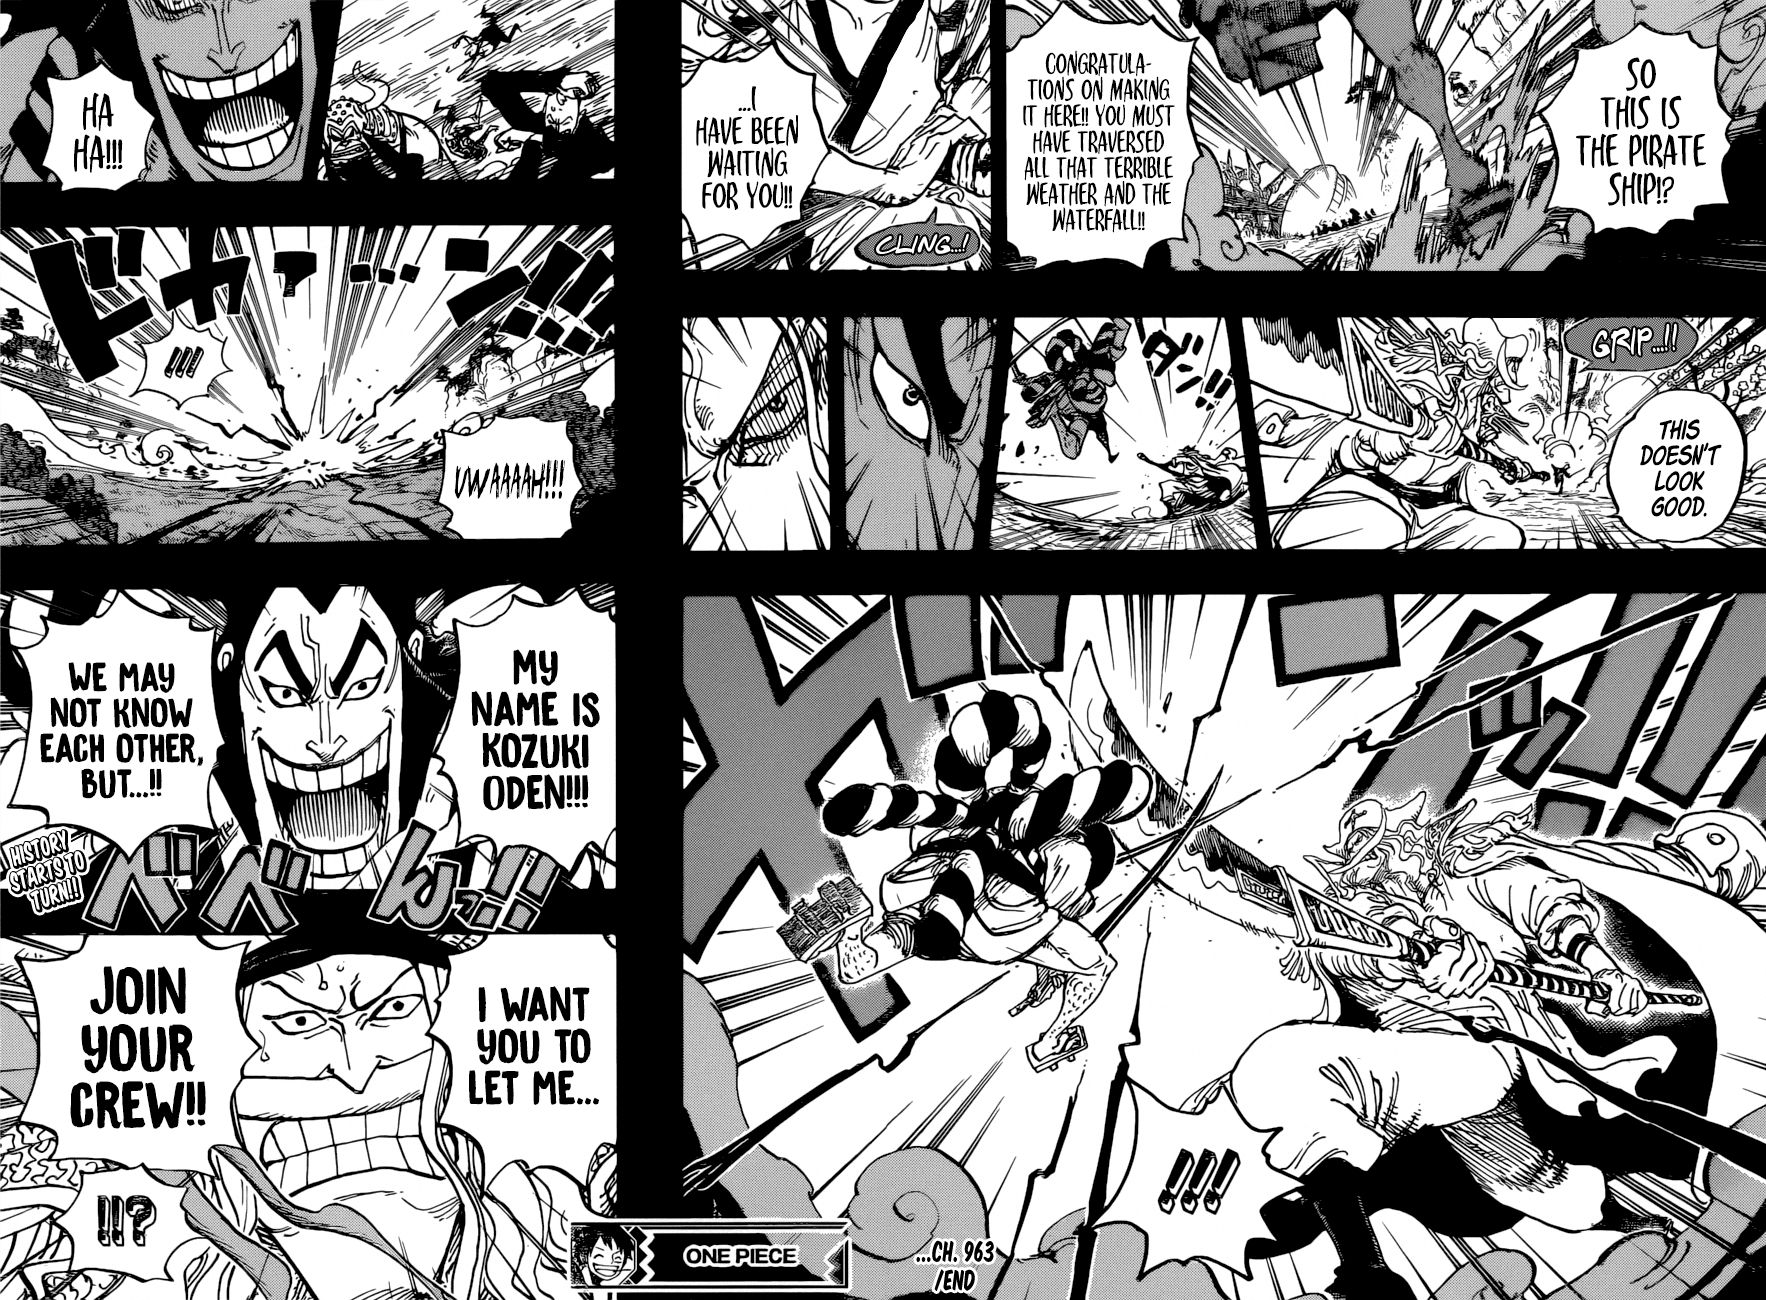 One Piece, Chapter 963 - Becoming Samurai image 15